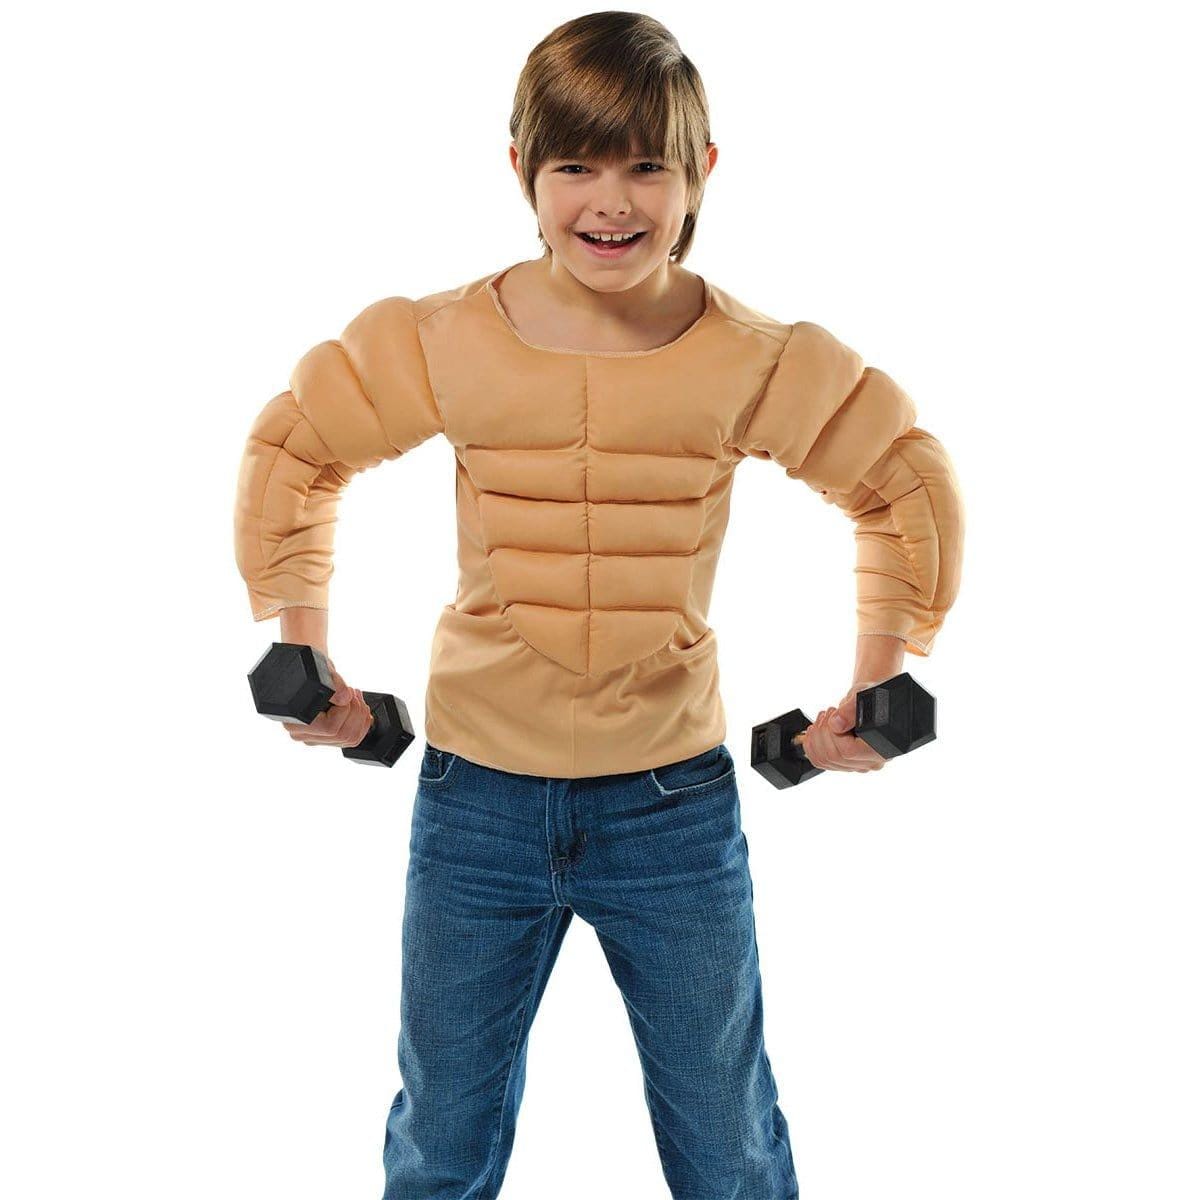 Buy Costume Accessories Muscle shirt for kids sold at Party Expert